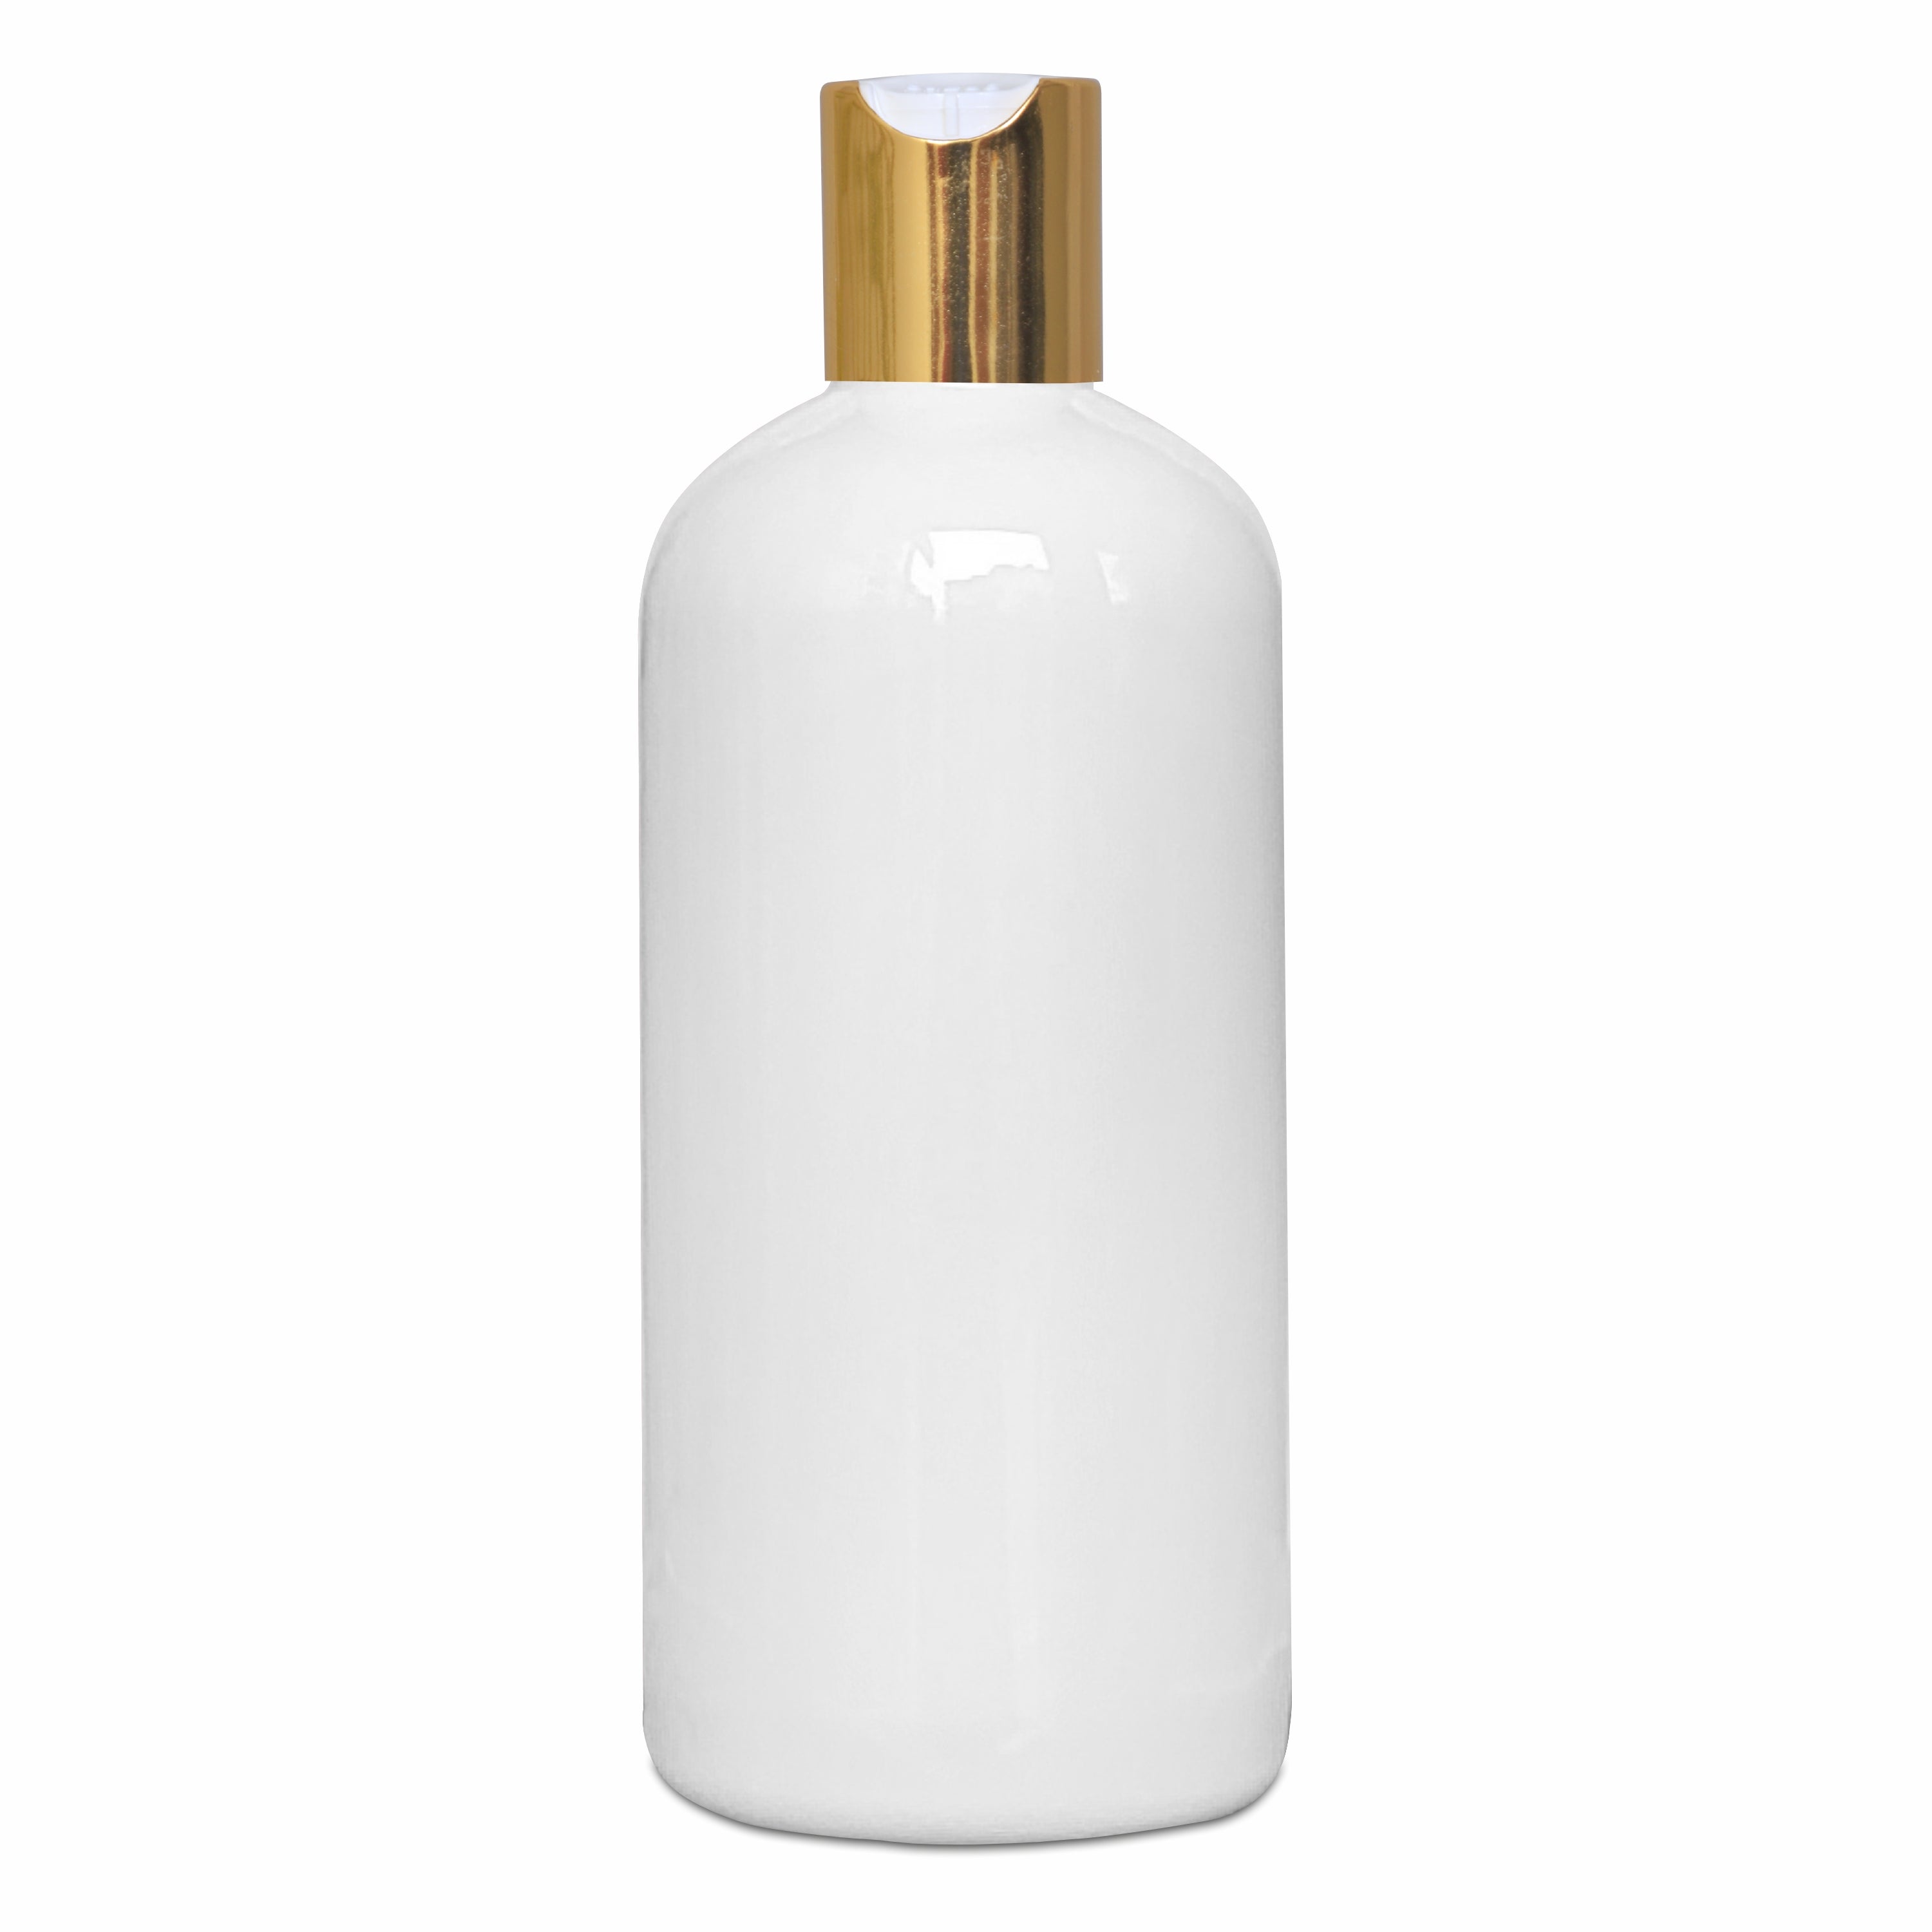 |ZMW73| MILKY WHITE ROUND SHAPE PET BOTTLE WITH GOLD PLATED DISKTOP CAP Available Size: 300ml